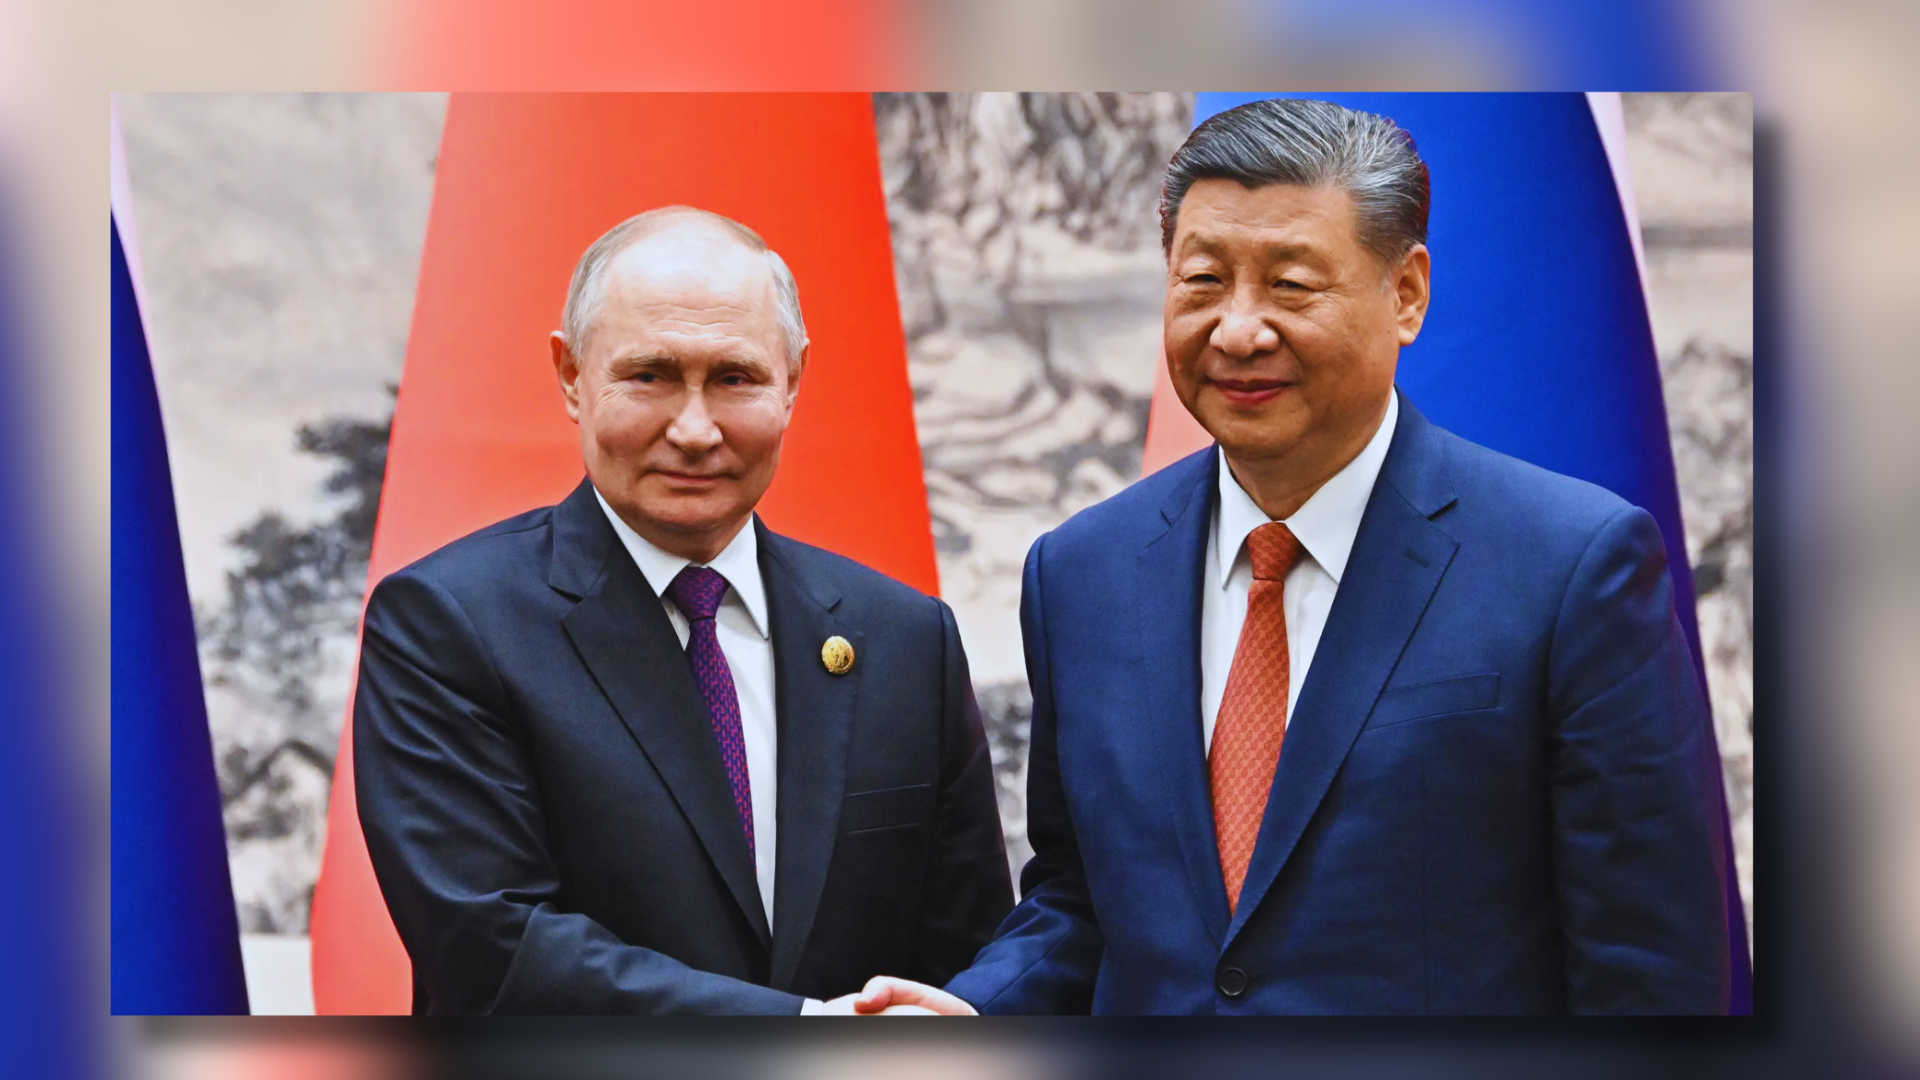 Putin And Xi Jinping Forge Ties To Strengthen Russo-Chinese Relations